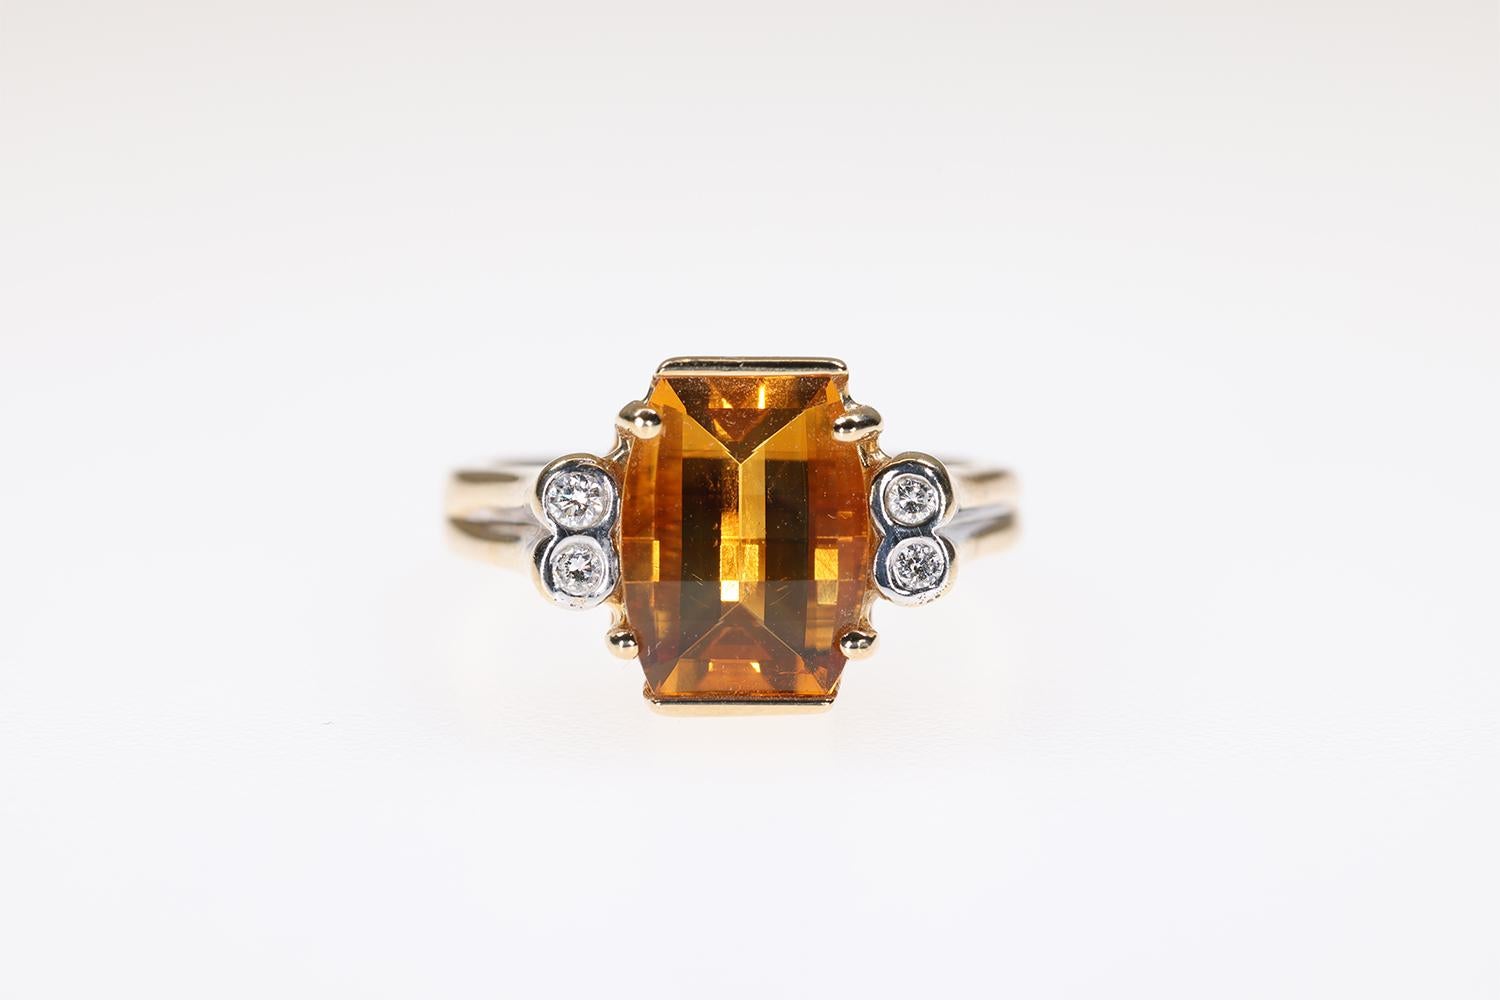 This is 14K yellow gold ring has a modern yet classic feel. The Citrine center stone has a deep rich golden color and the side round brilliant diamonds provide four beautiful accents. This is a gorgeous ring excellent for any occasion.